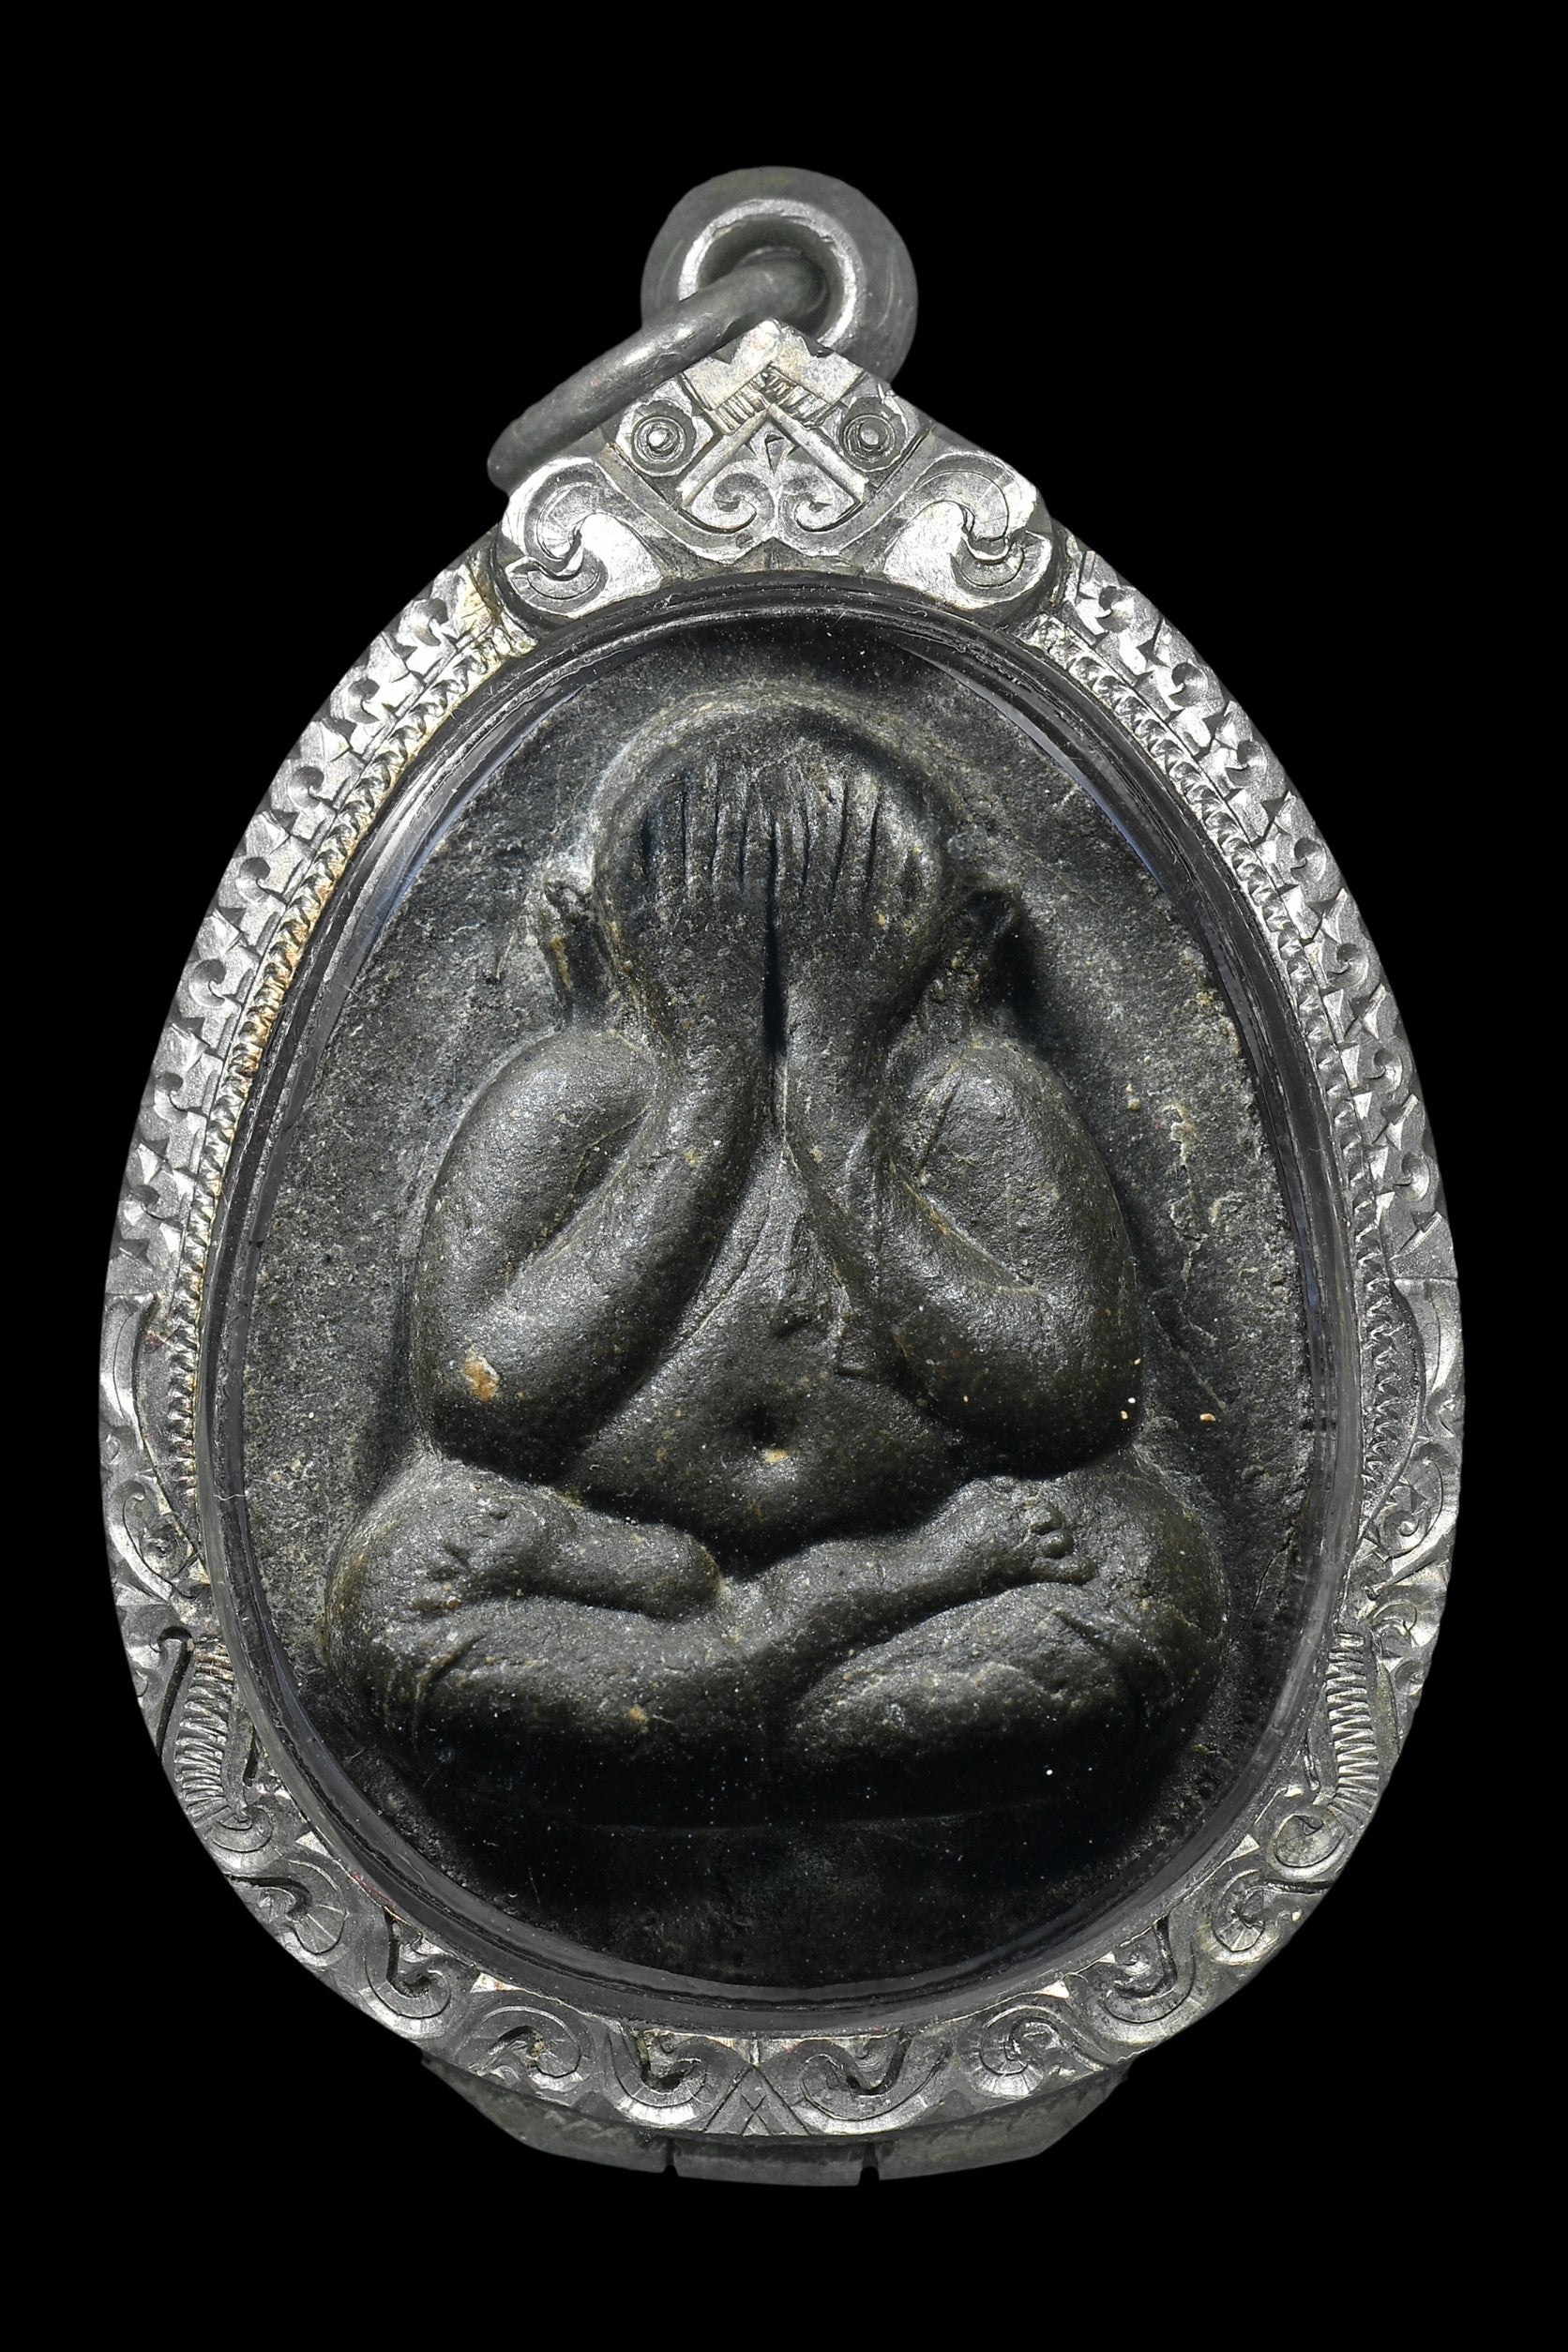 EverGreen Amulet , Blessing Always There .